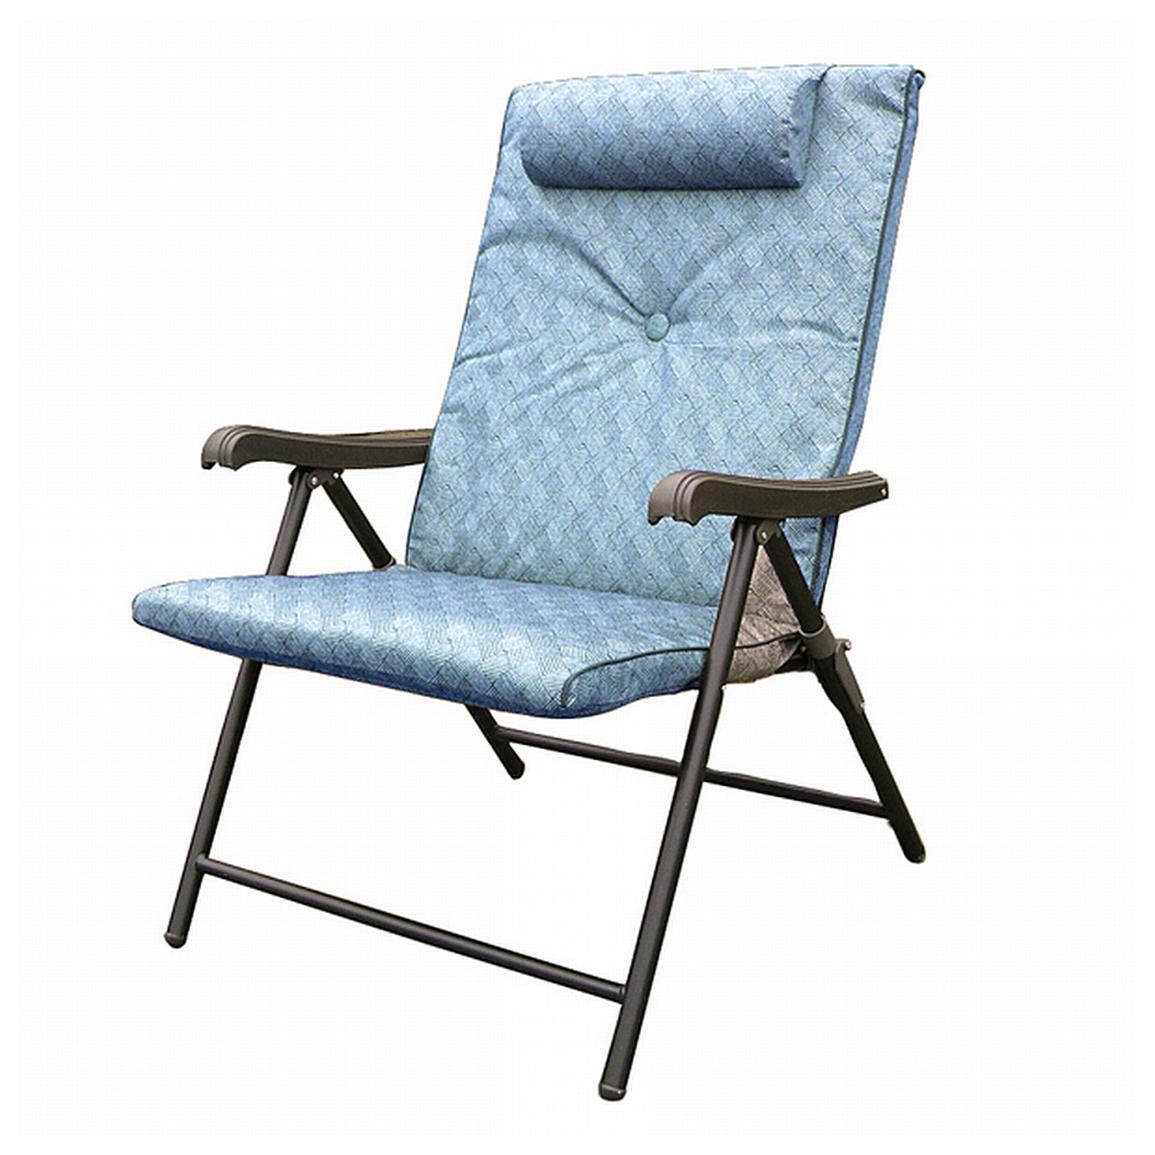 prime plus folding chair, blue - 425486, camping chairs at sportsman's